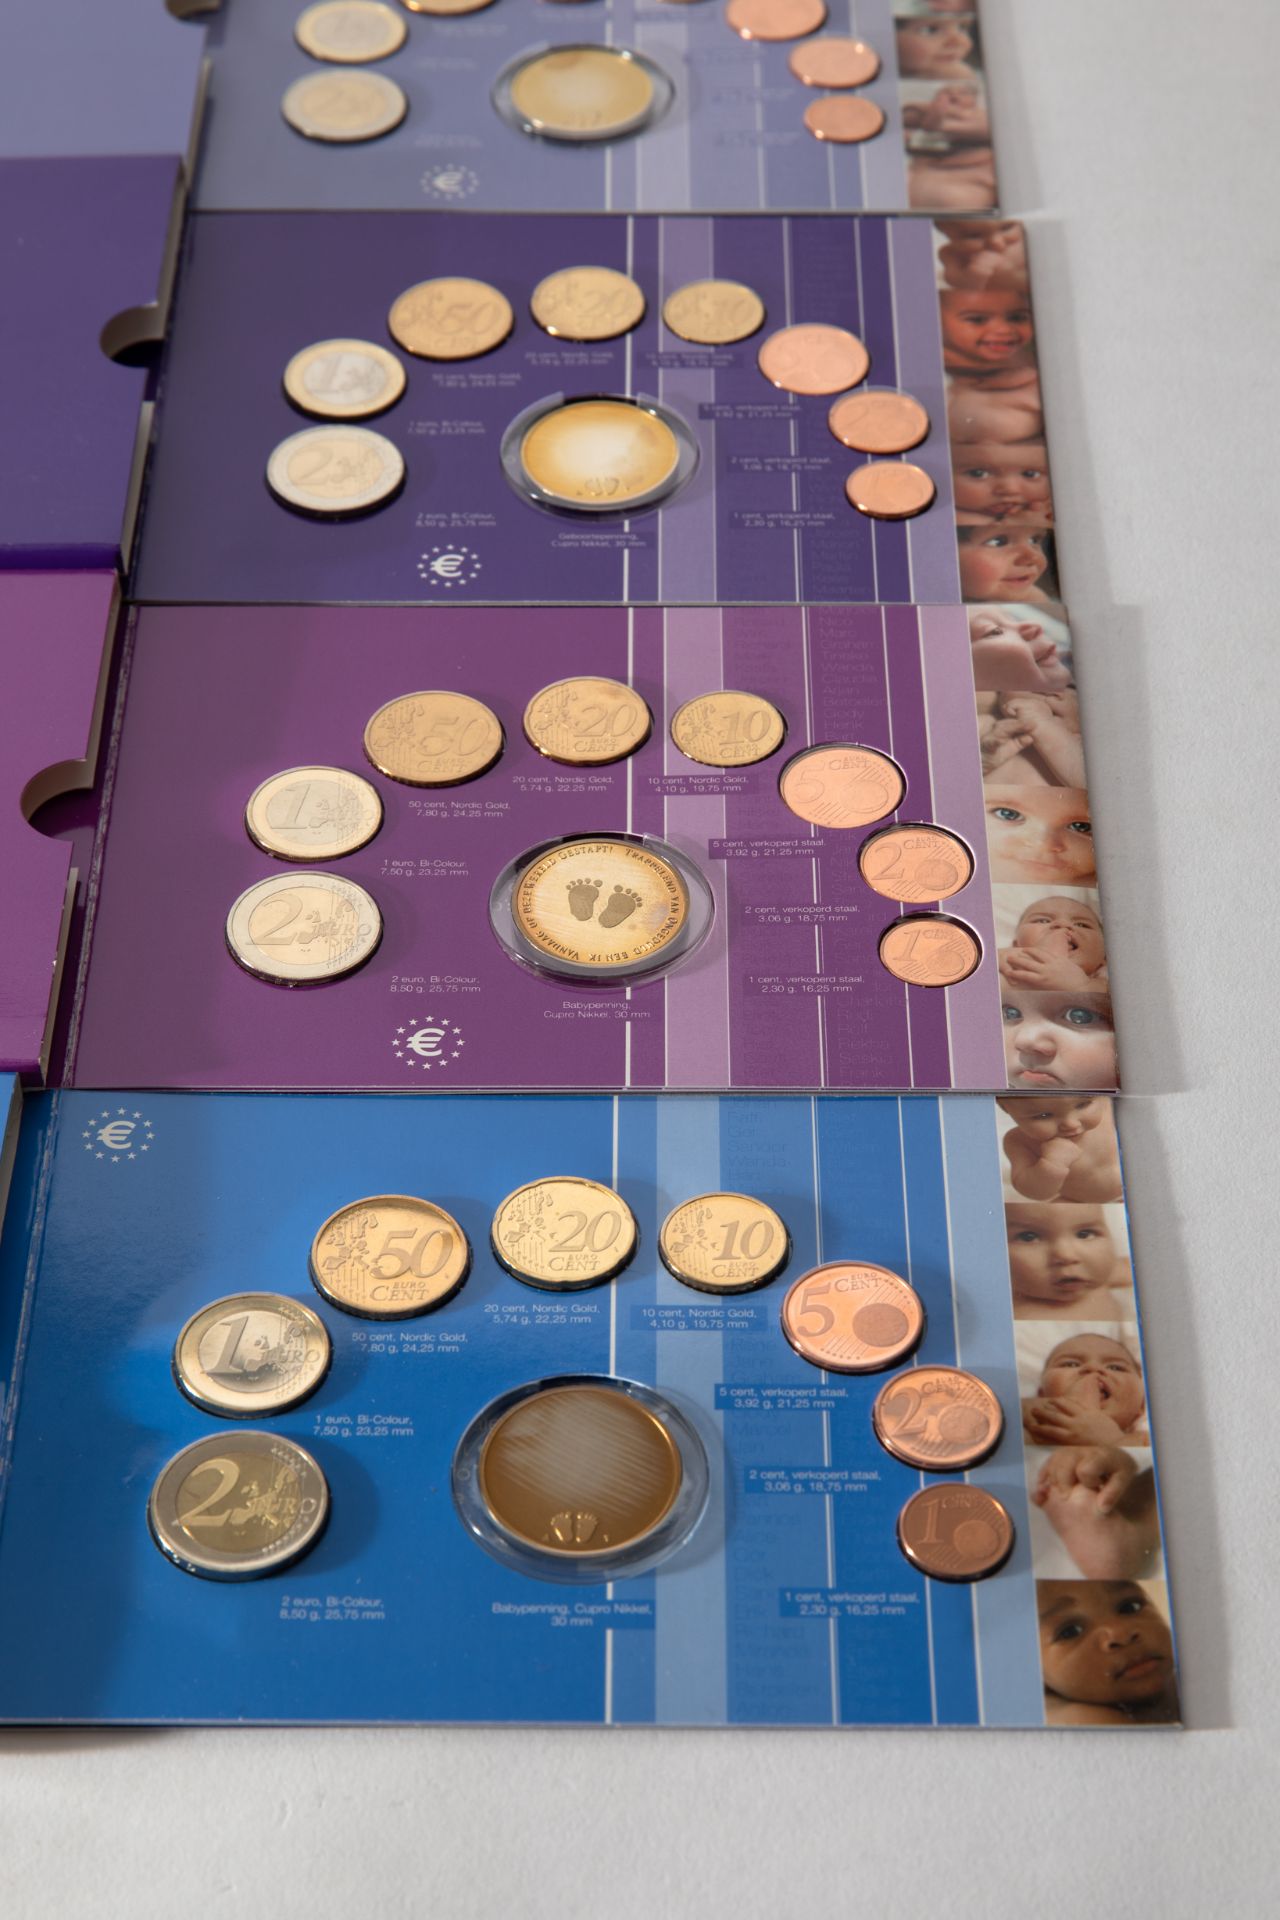 14x Netherlands Euro Coin Sets - Image 10 of 10